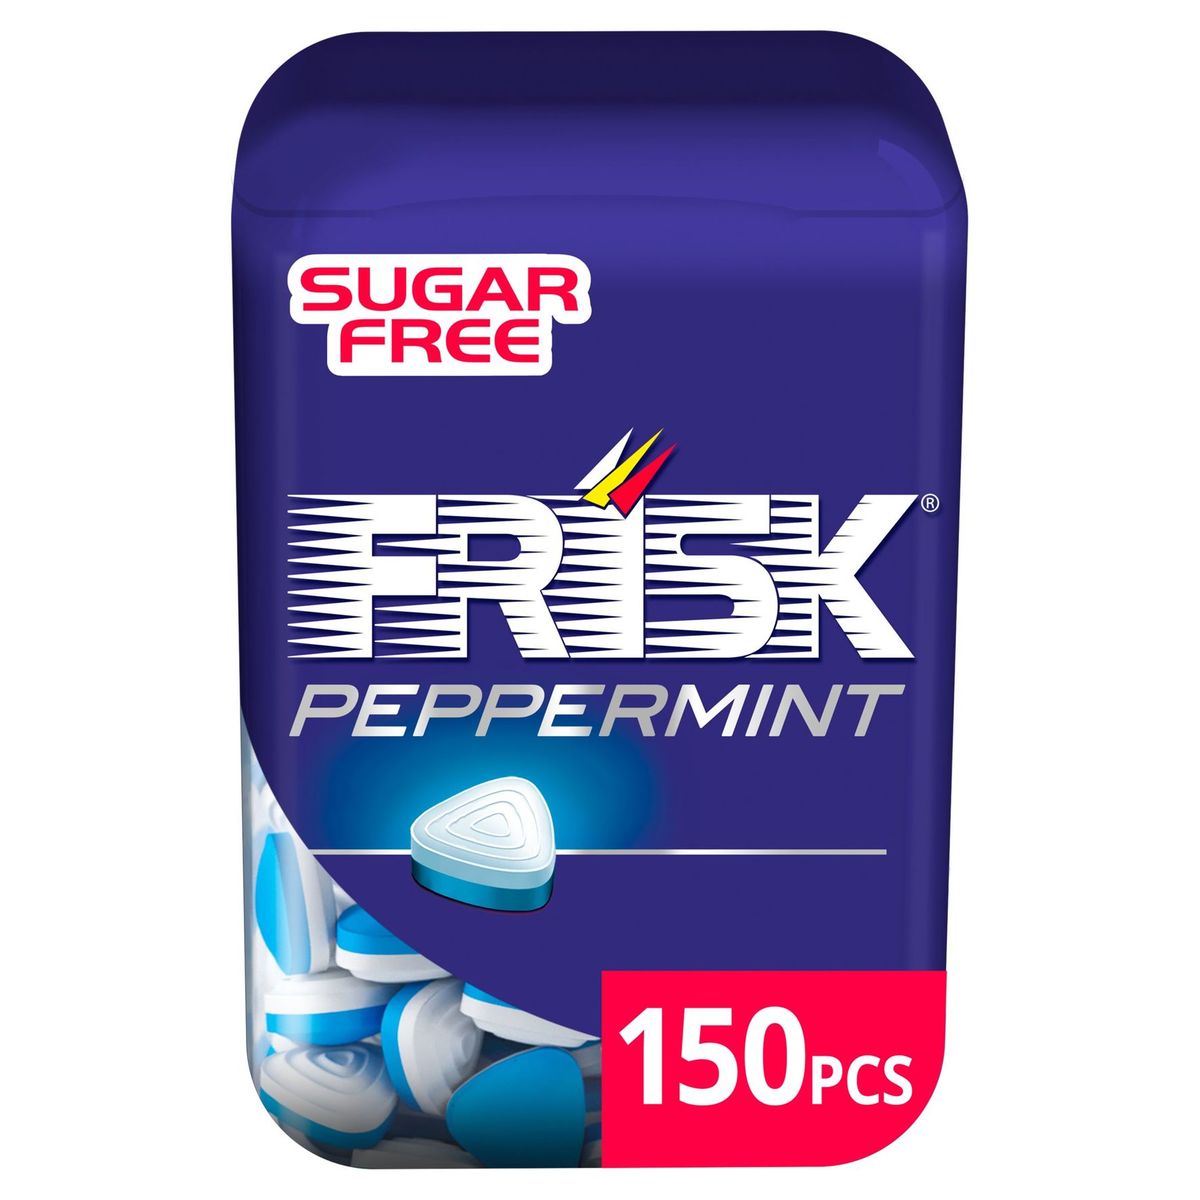 Frisk Peppermint Sugarfree Value Pack 150 Mints 105 g